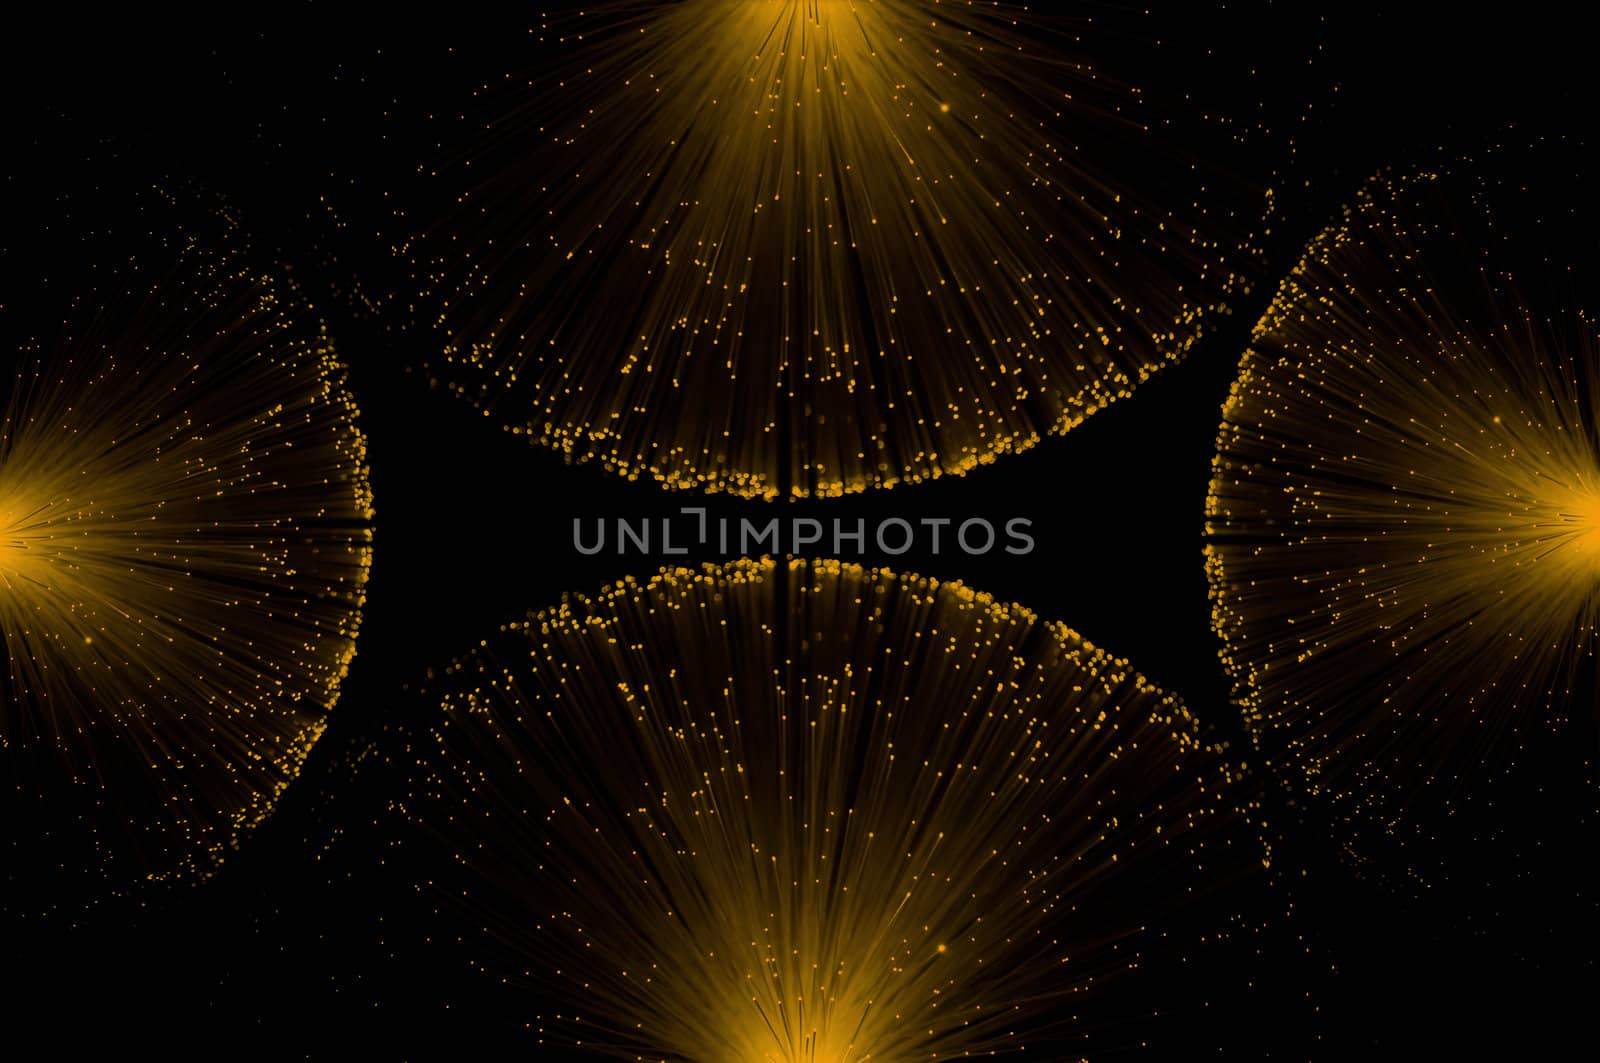 Four groups of illuminated golden fibre optic light strands eminating from each edge of the image against a black background.